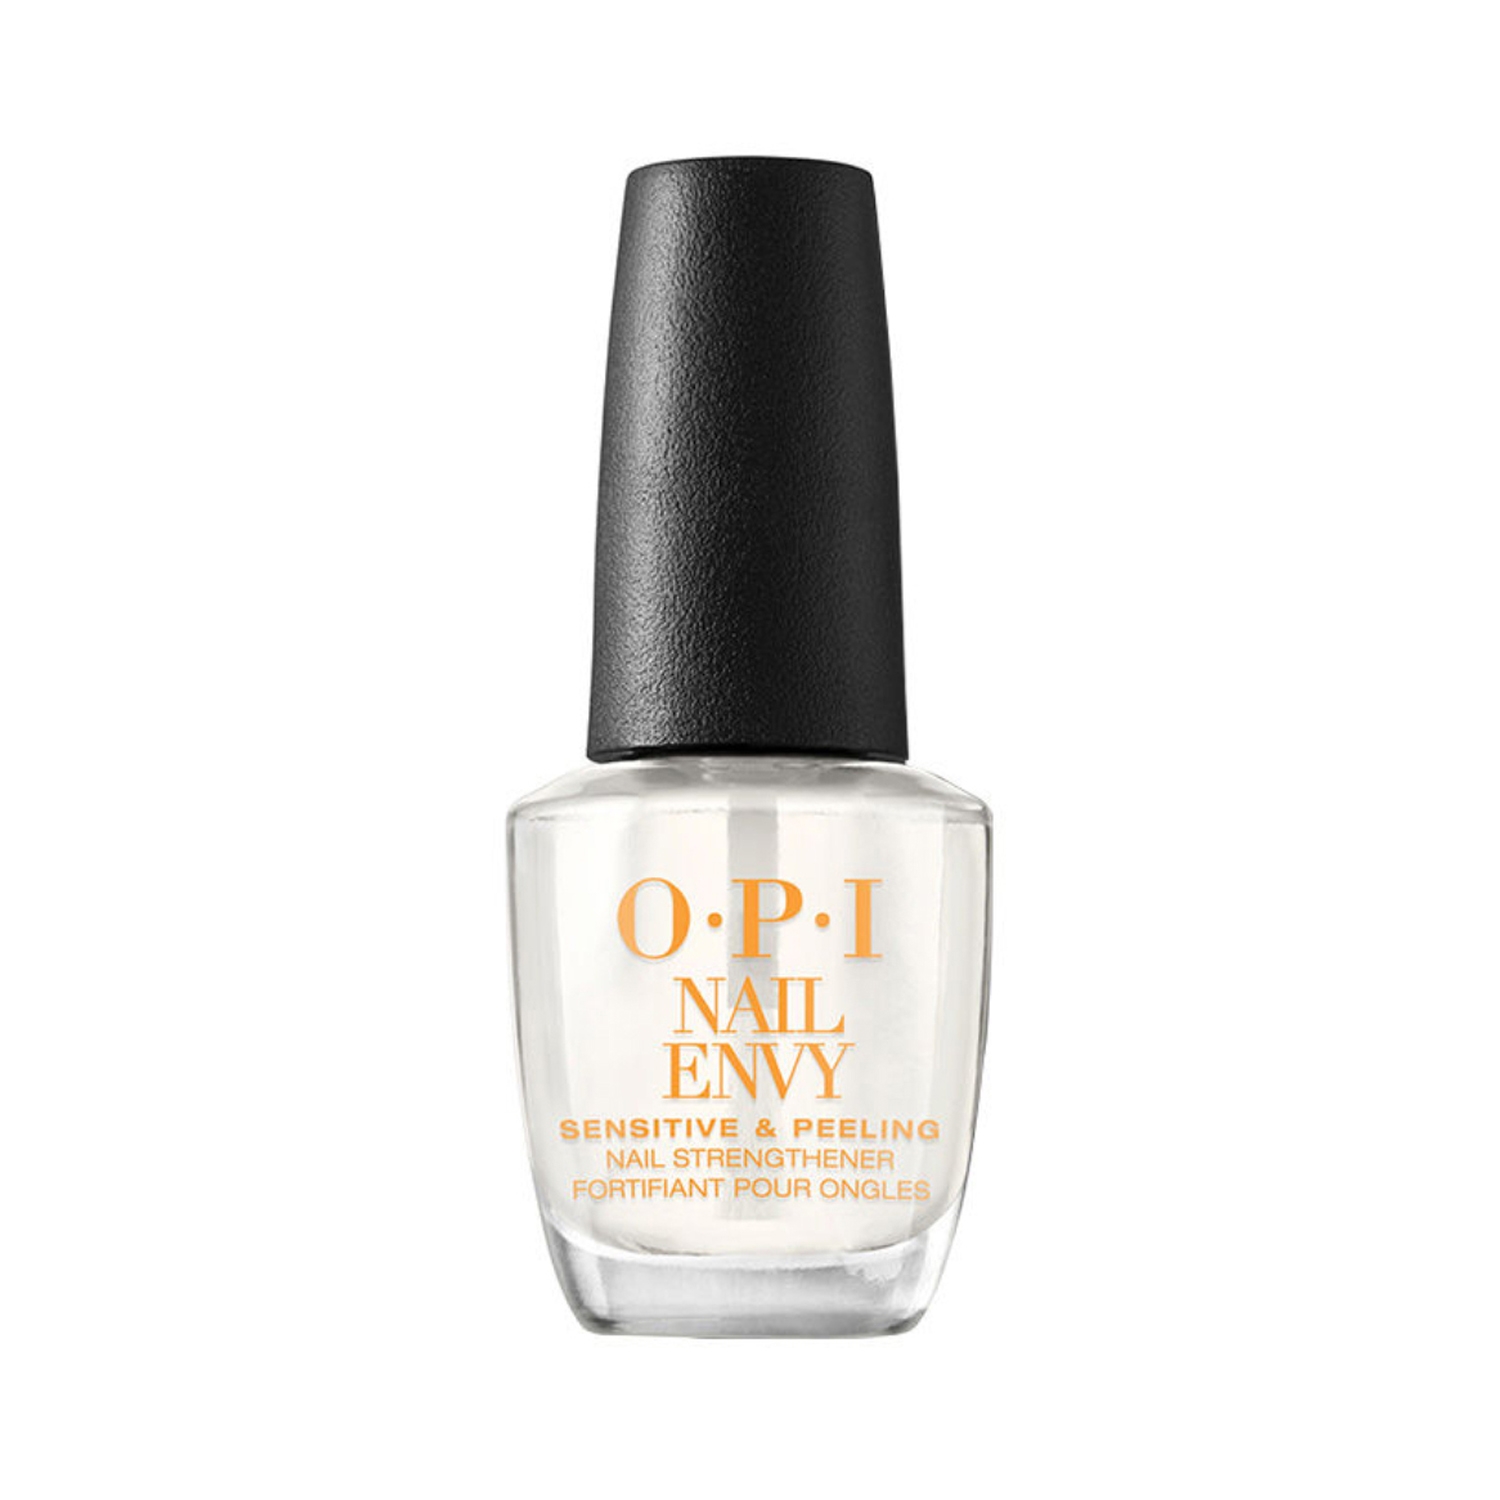 OPI Nail Envy, Soft and Thin Nail Strengthener Treatment, 0.5 Fl Oz :  Amazon.ca: Beauty & Personal Care